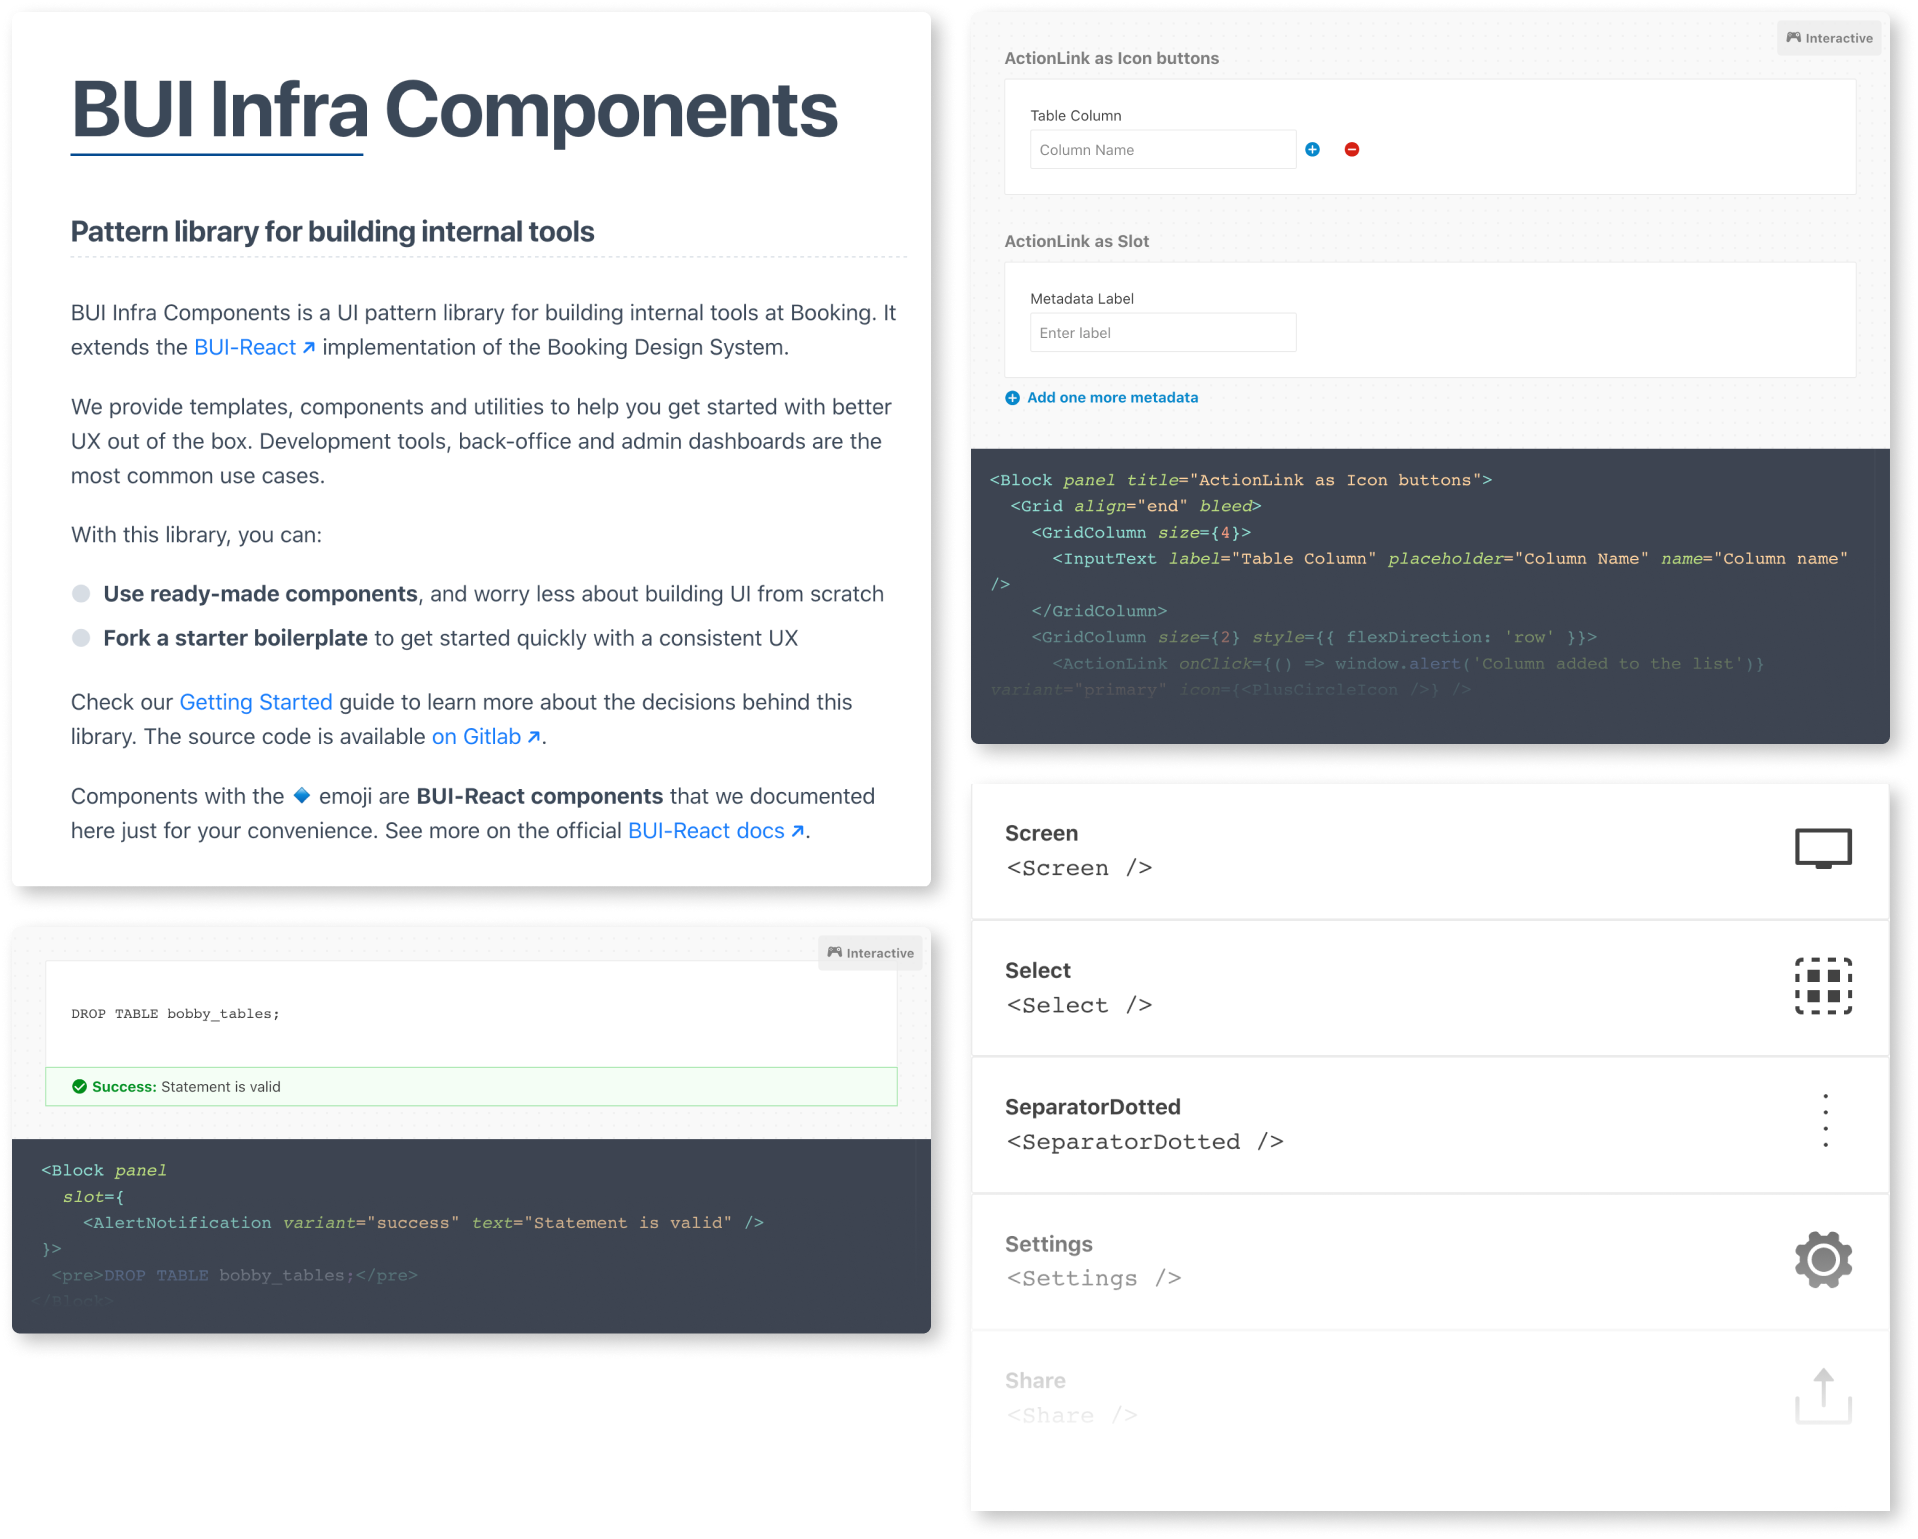 Infra Components documentation and components example